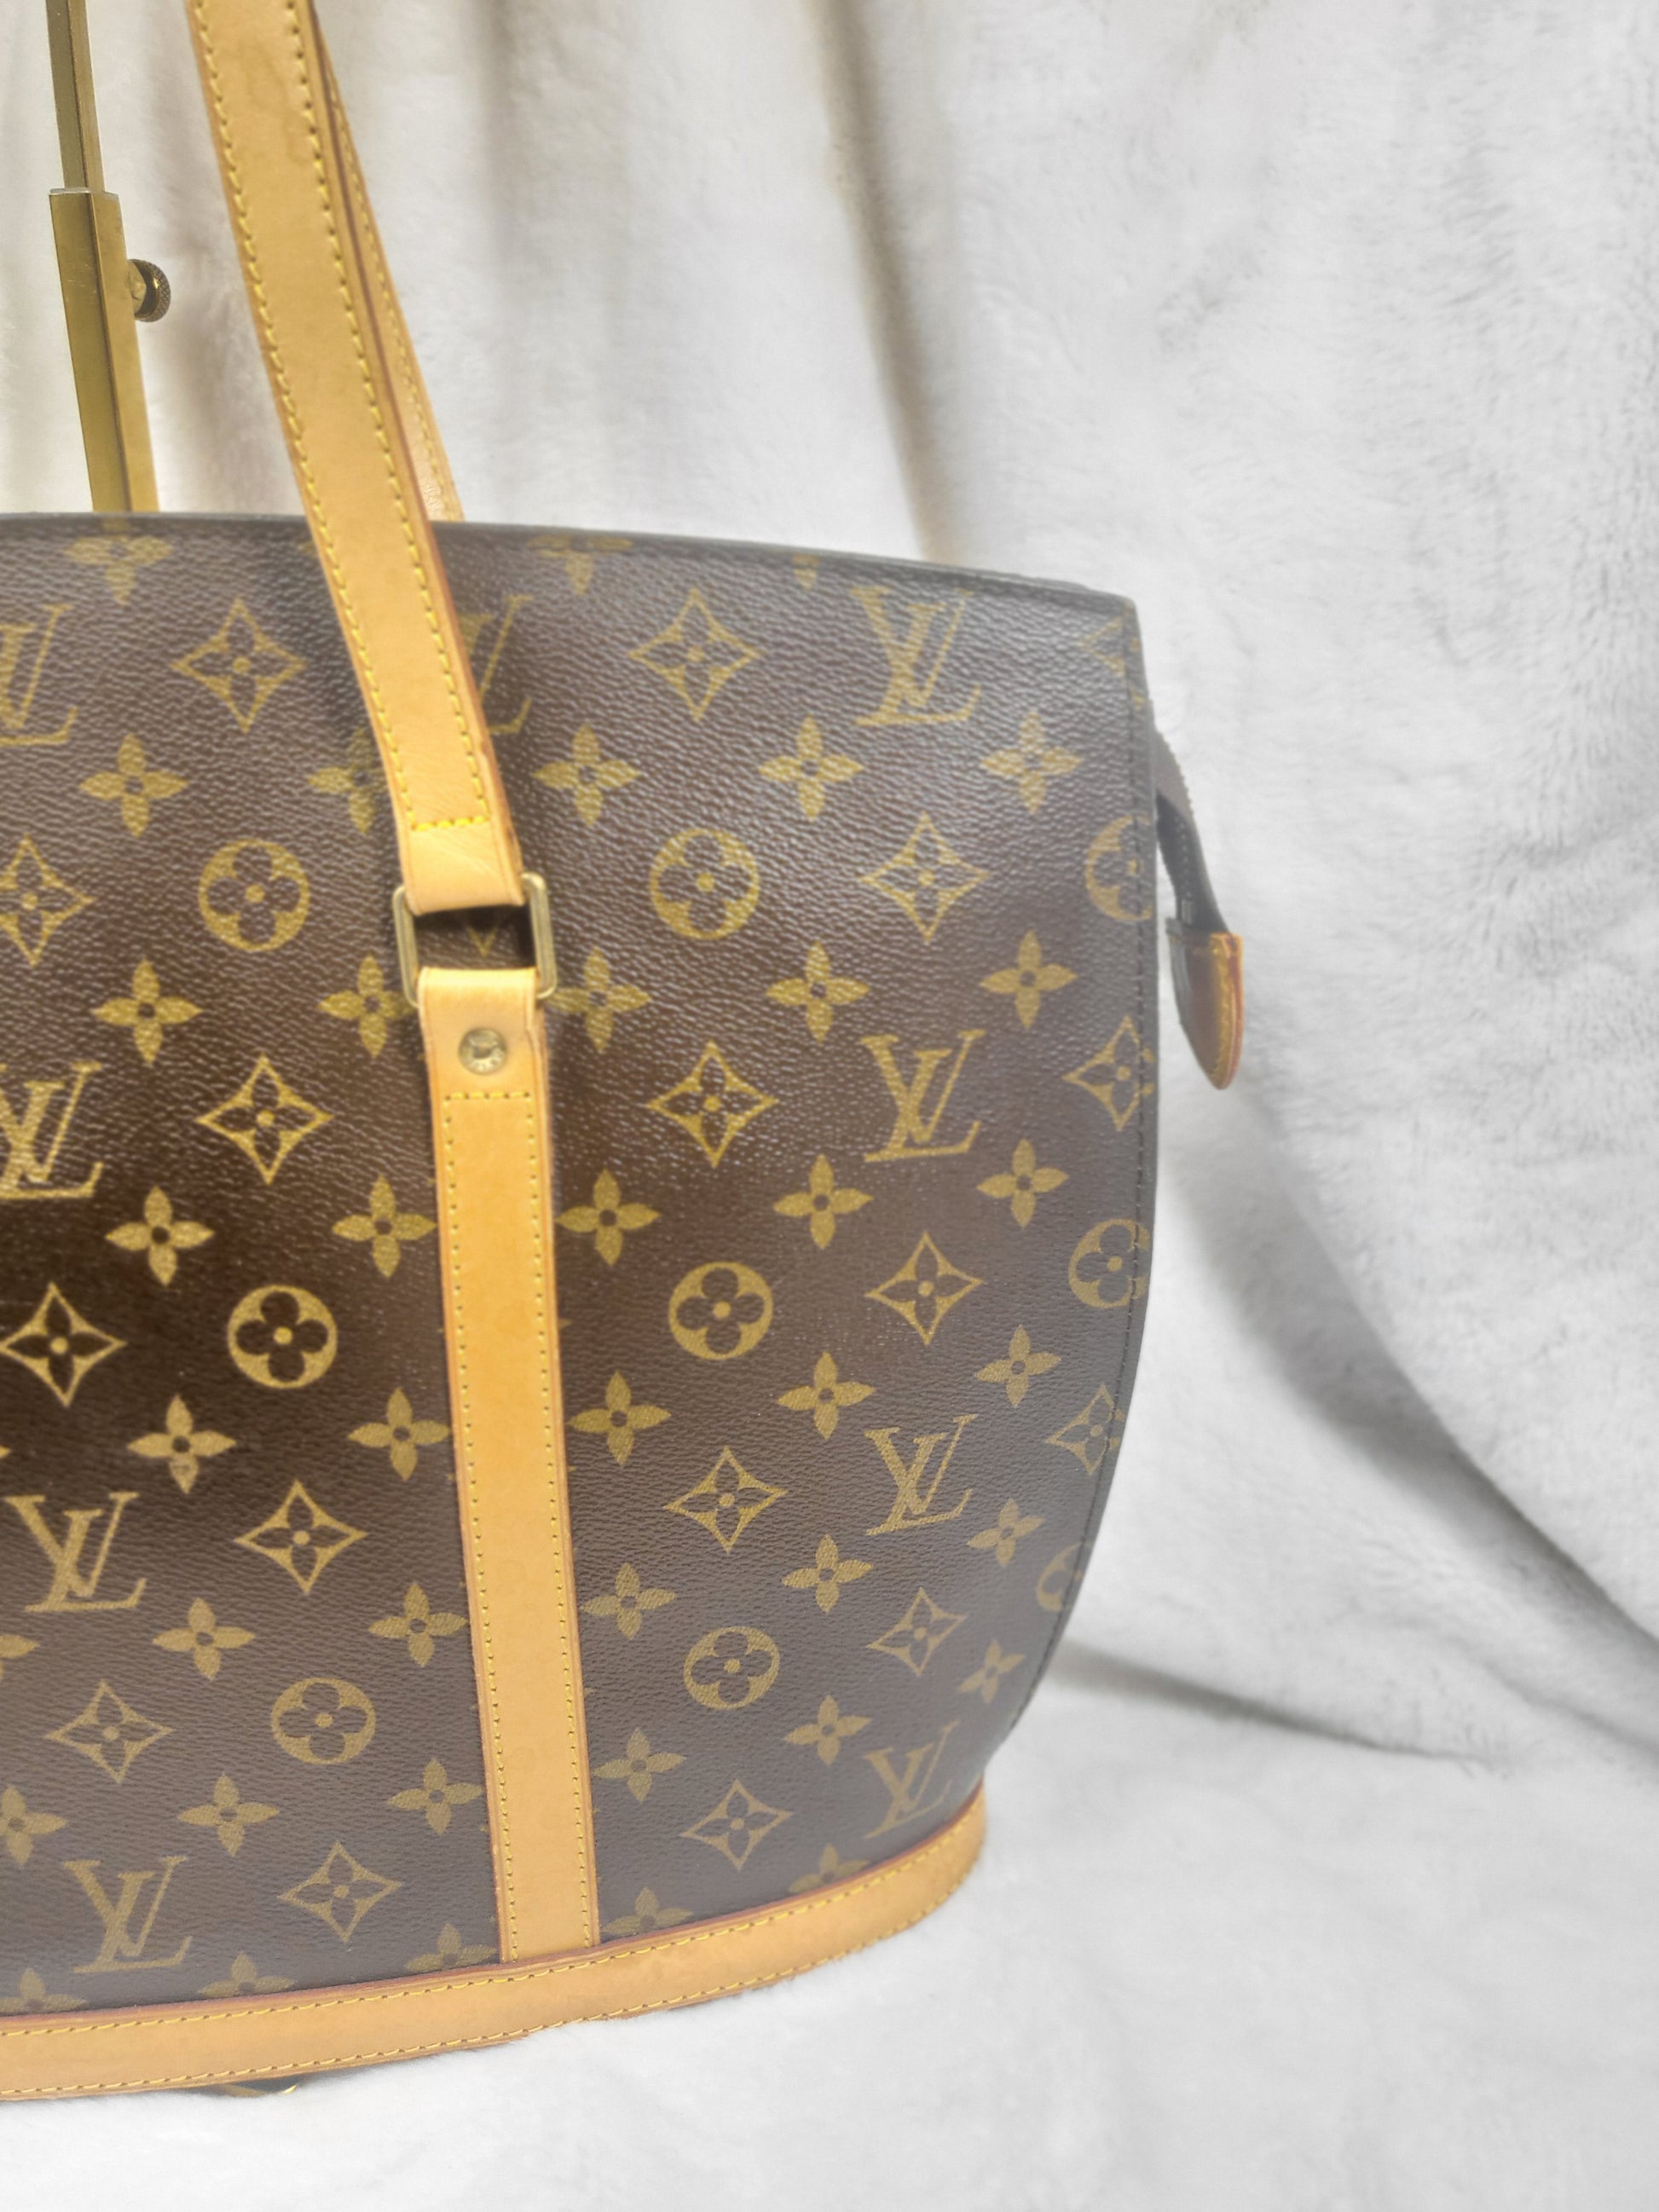 Pre-owned Louis Vuitton Brown Monogram Canvas Babylone Tote Bag